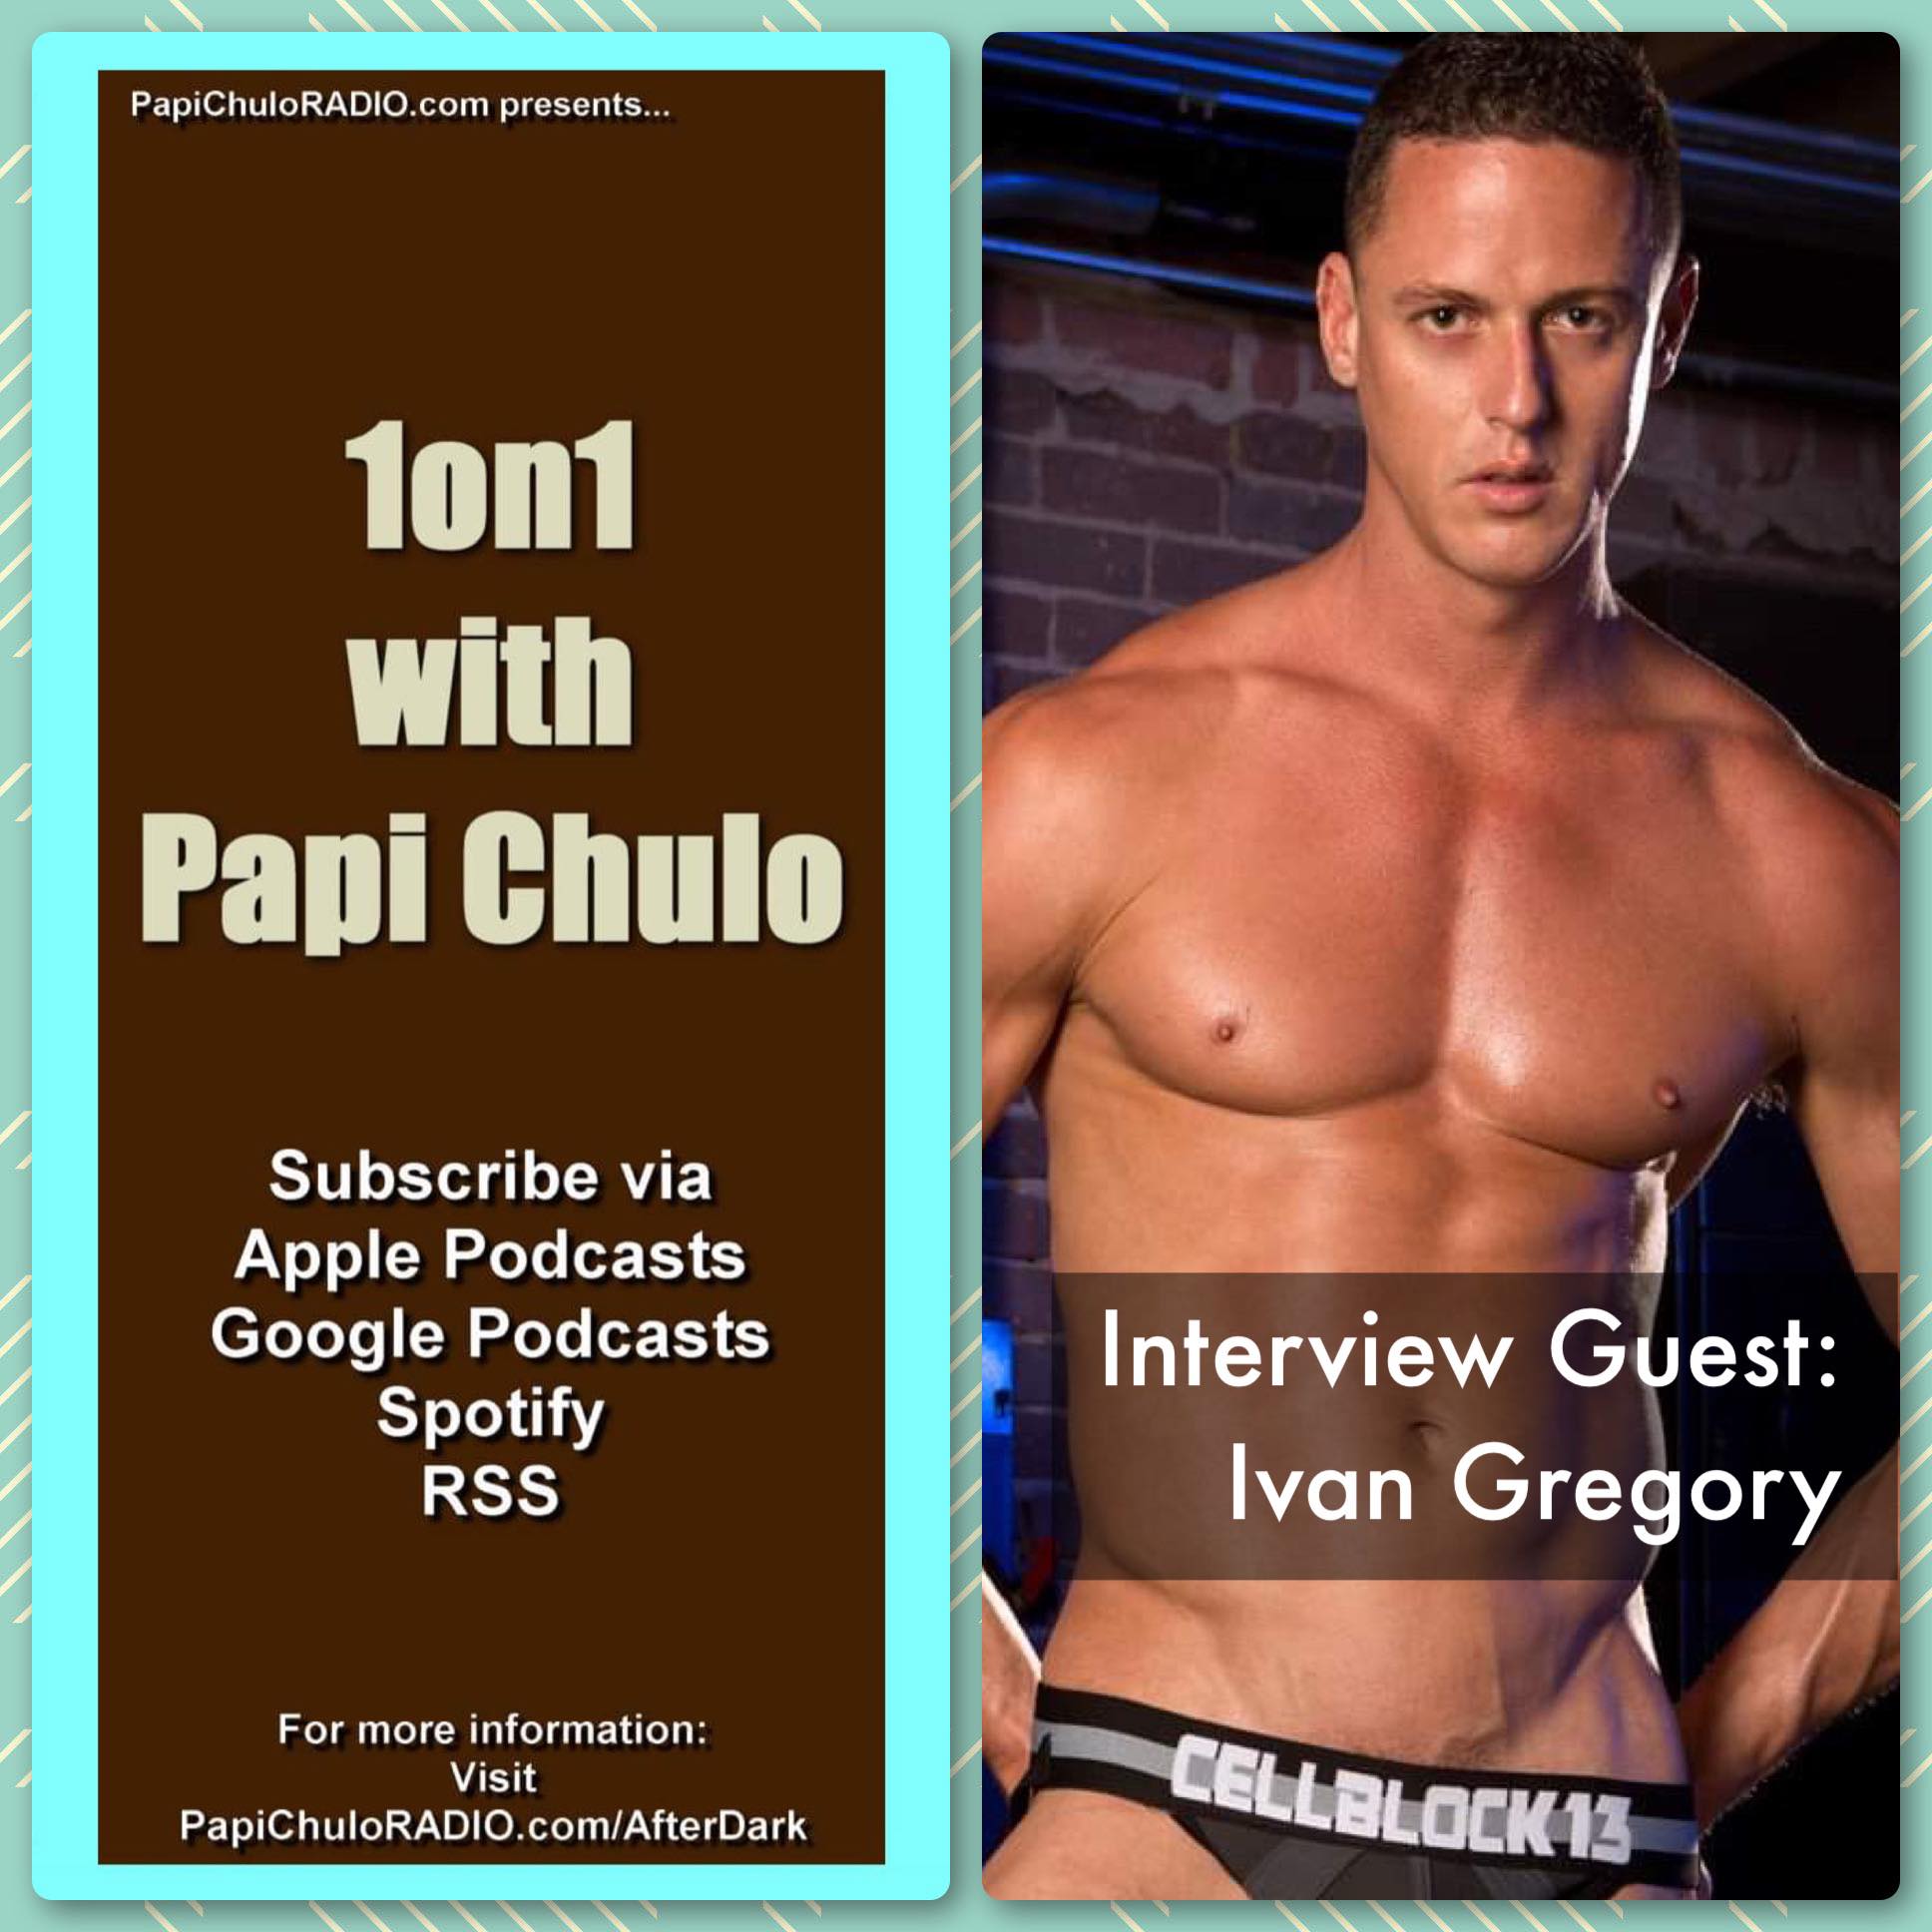 1on1 with Papi Chulo – Special Guest: IVAN GREGORY [April 9, 2015]